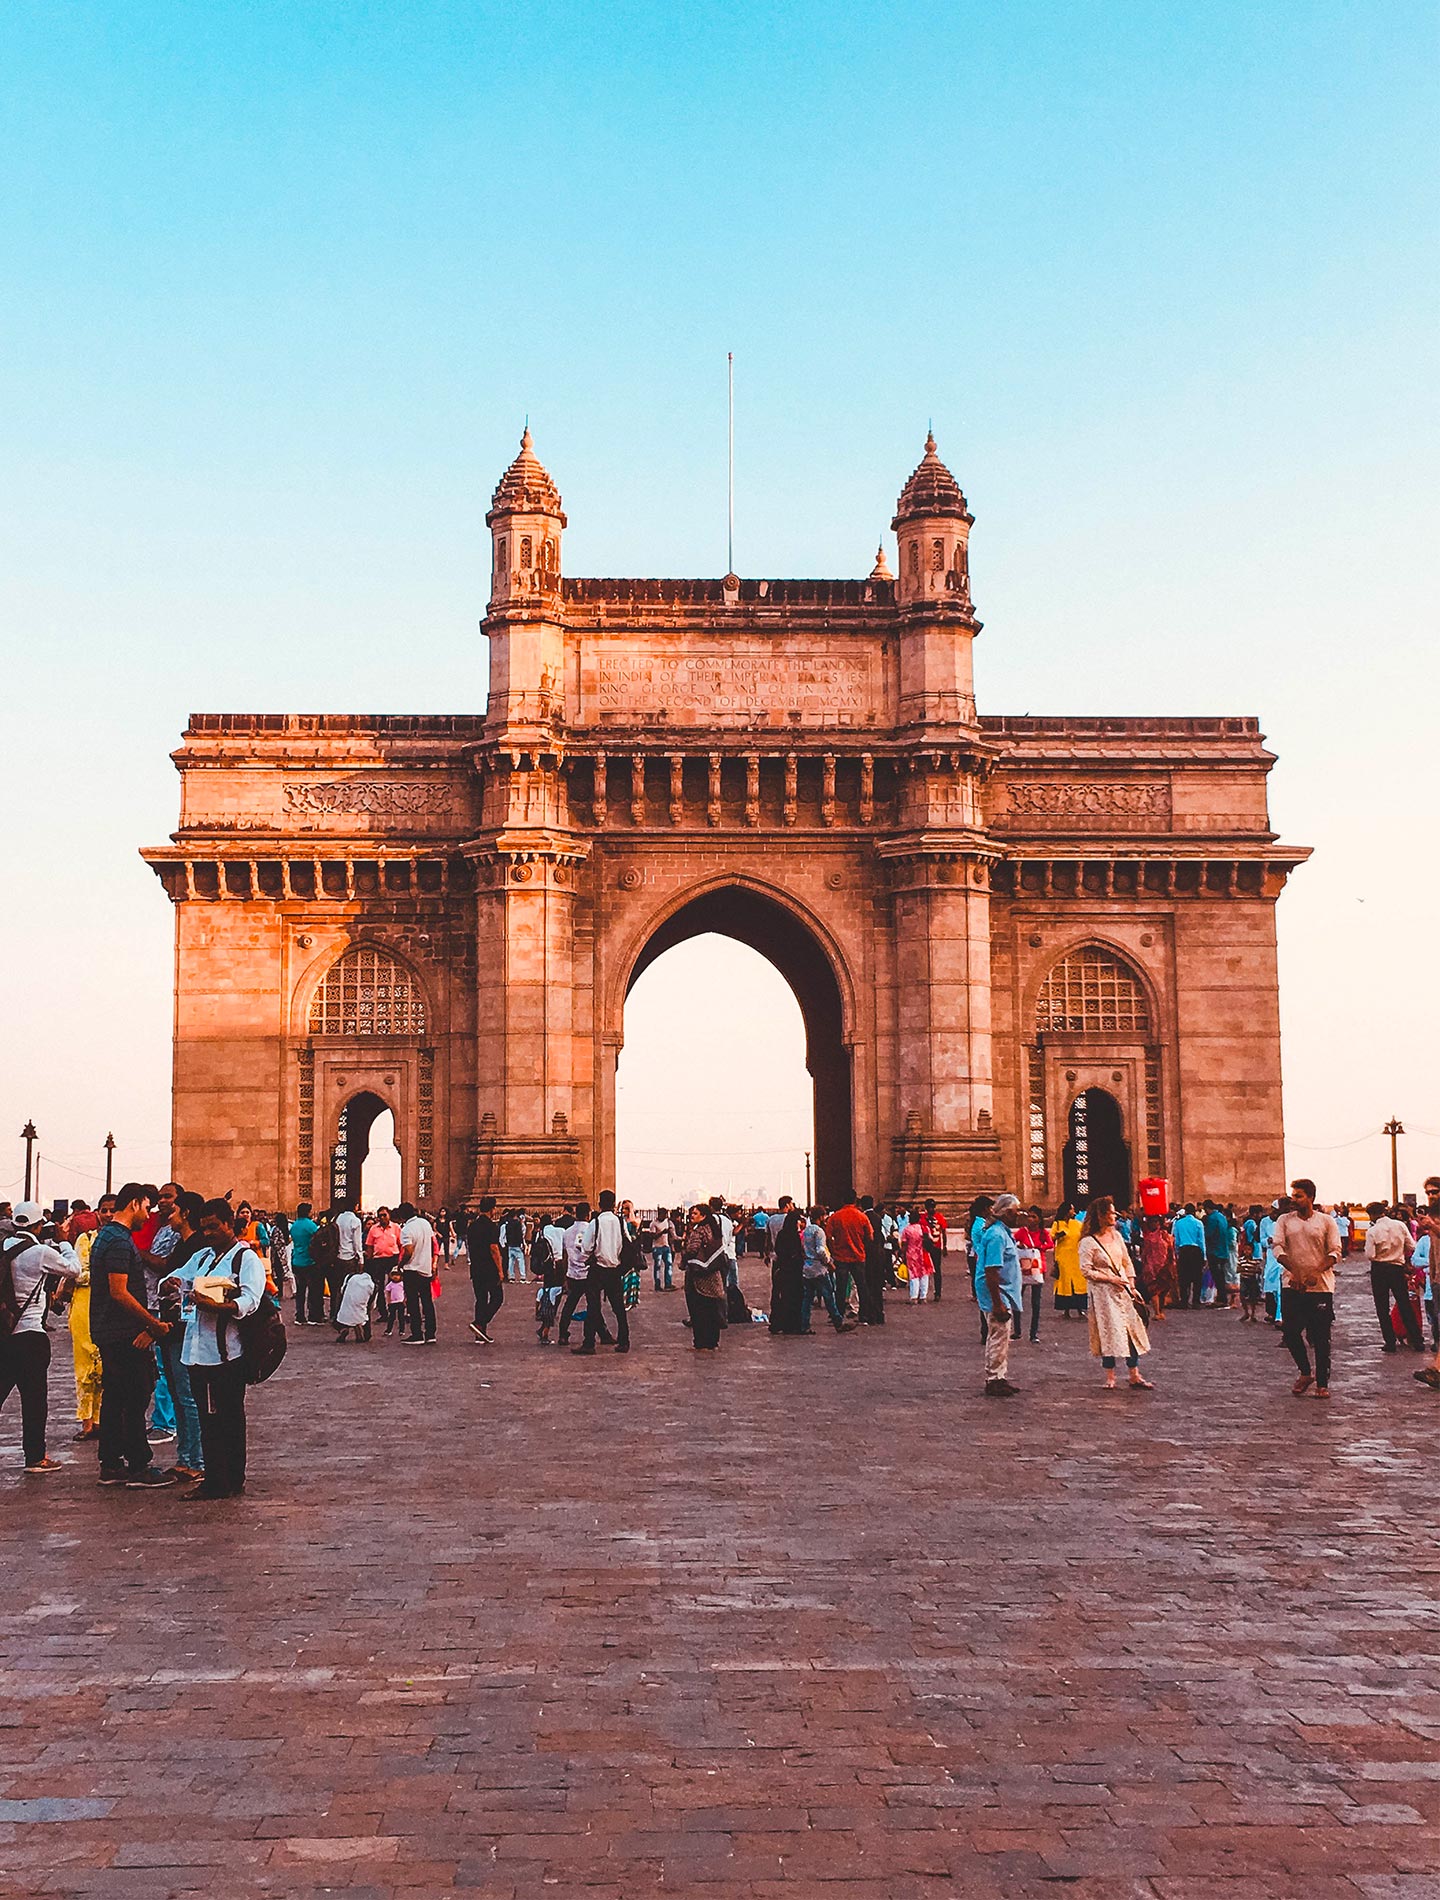 On Mar. 30, Maria Grazia Chiuri will stage a fashion show at the historic Gateway of India monument in Mumba